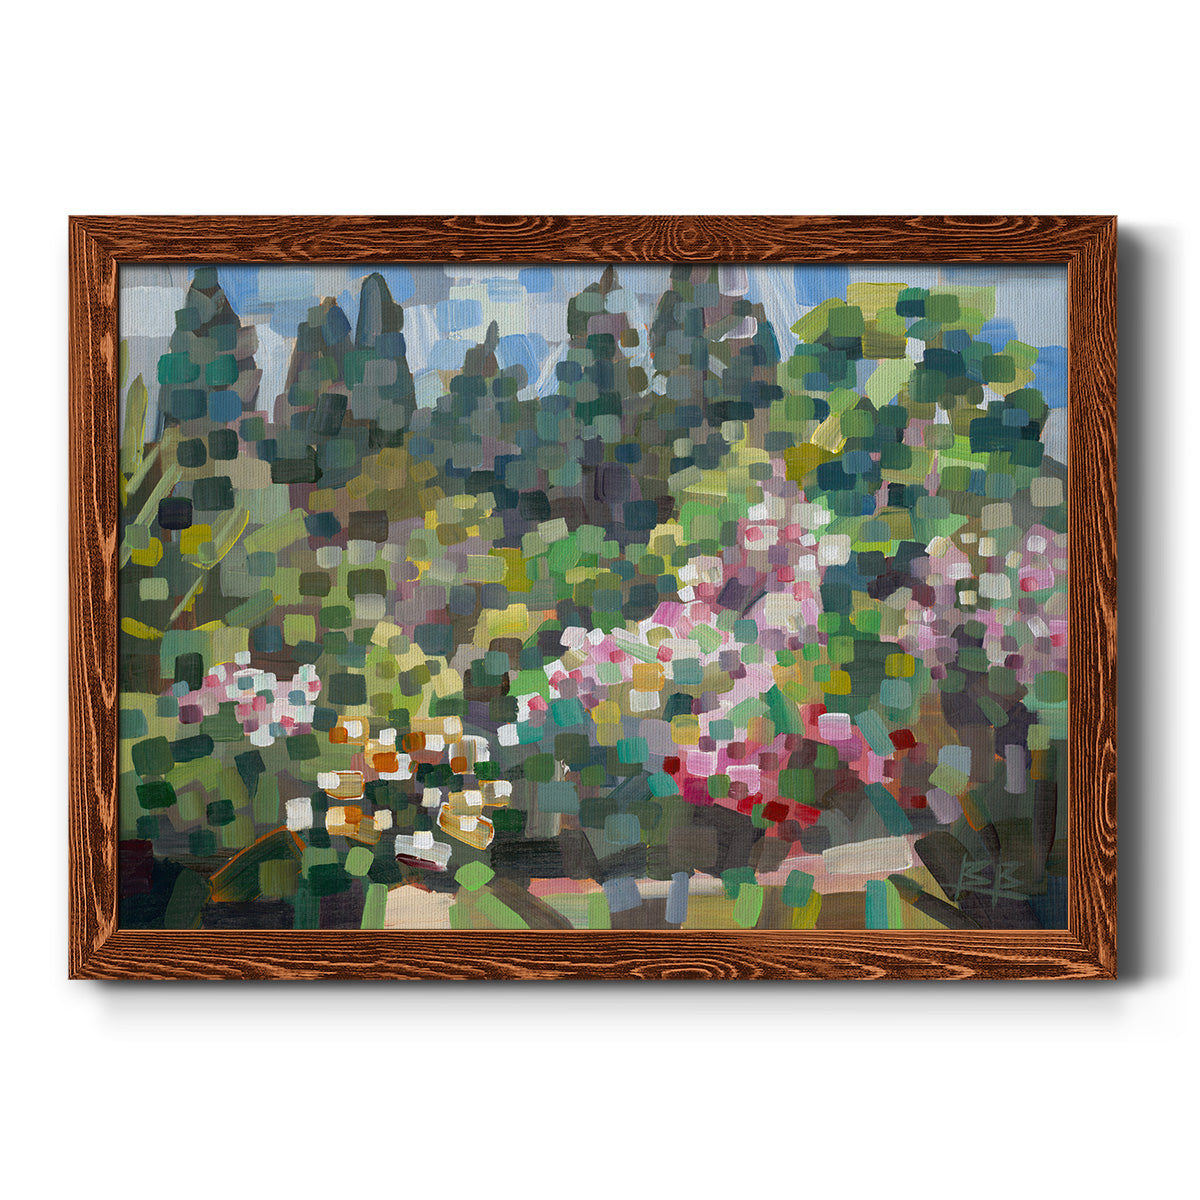 Arboretum in Spring-Premium Framed Canvas - Ready to Hang